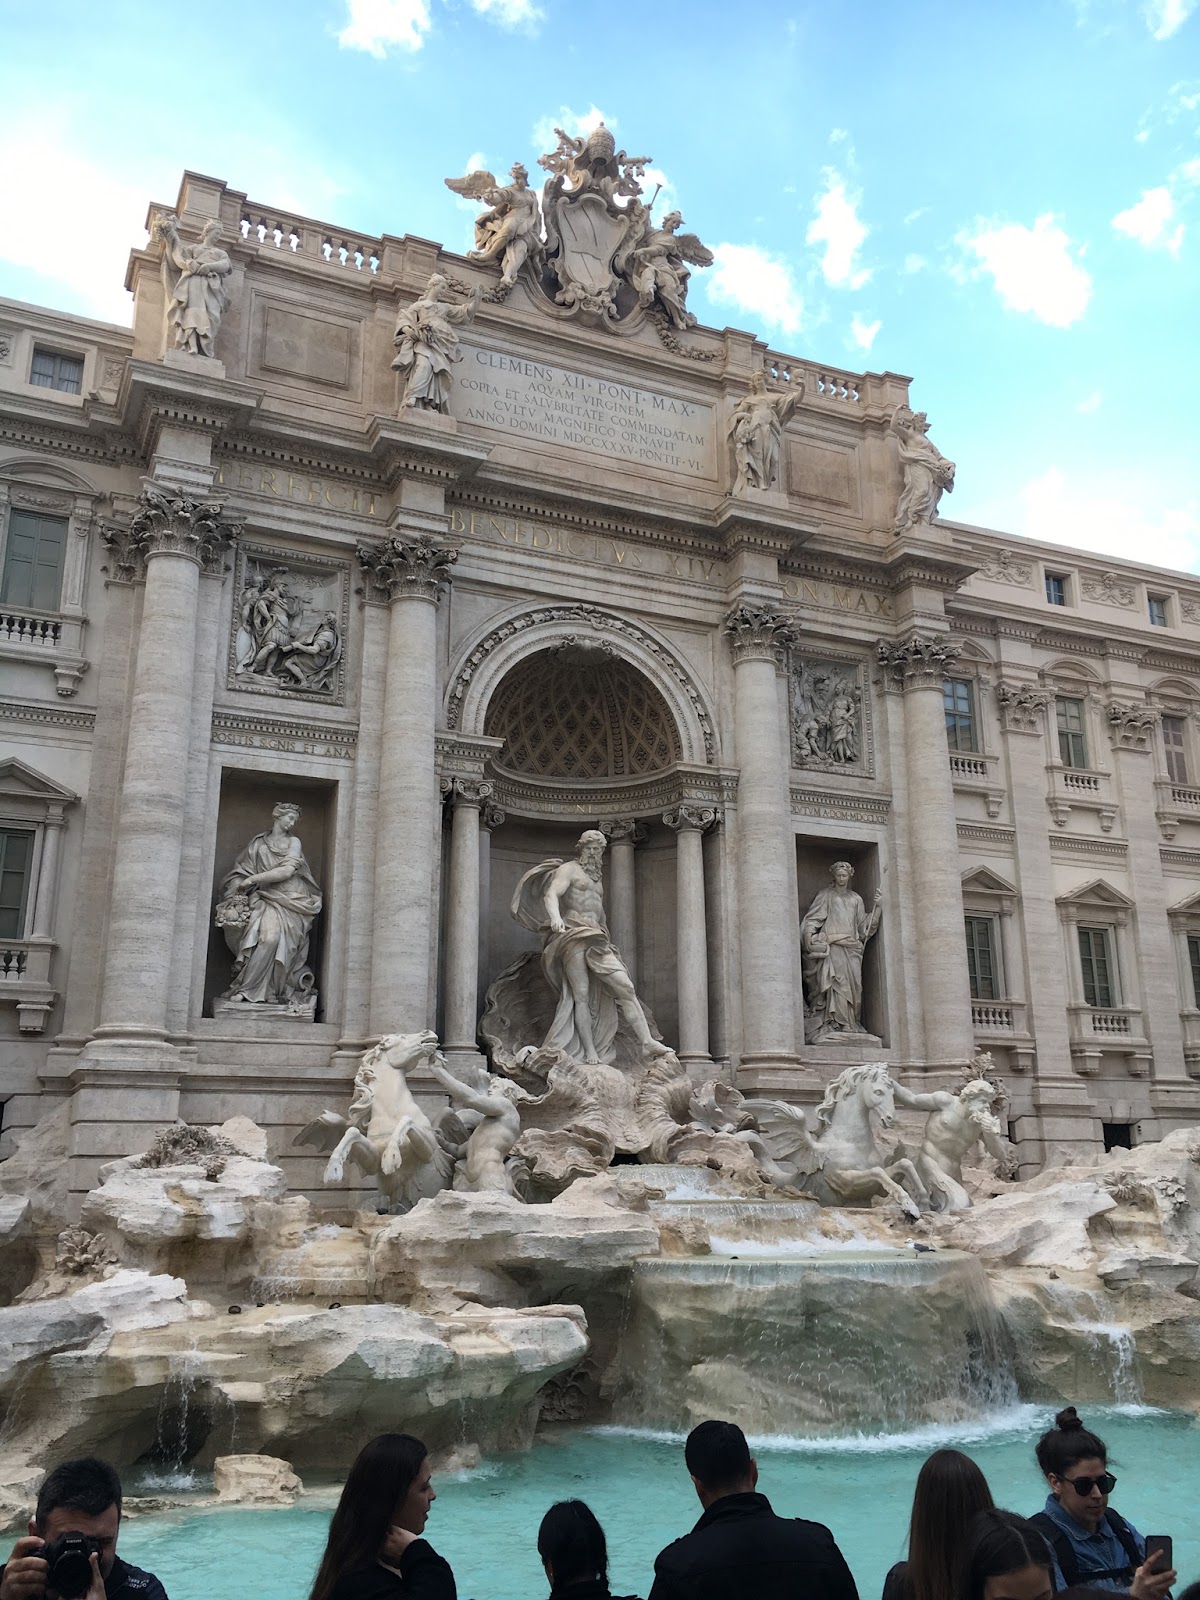 The Trevi Fountain with a bright blue sky and water